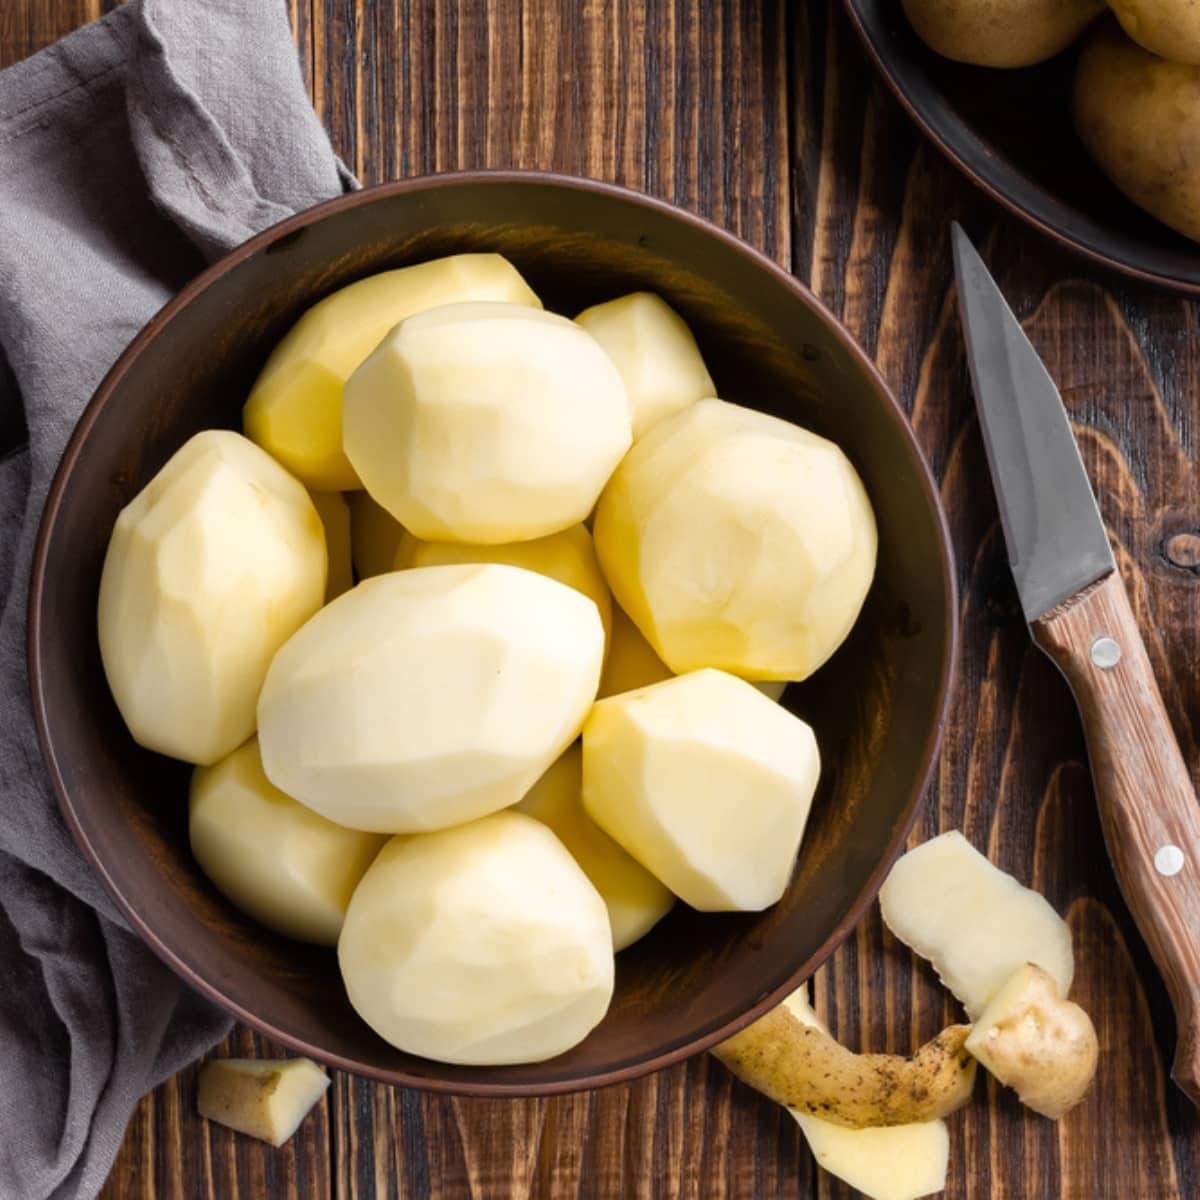 How to Keep Potatoes From Turning Brown featuring Peeled Potatoes in a Bowl on a Wooden Table with a Pairing Knife Next To It